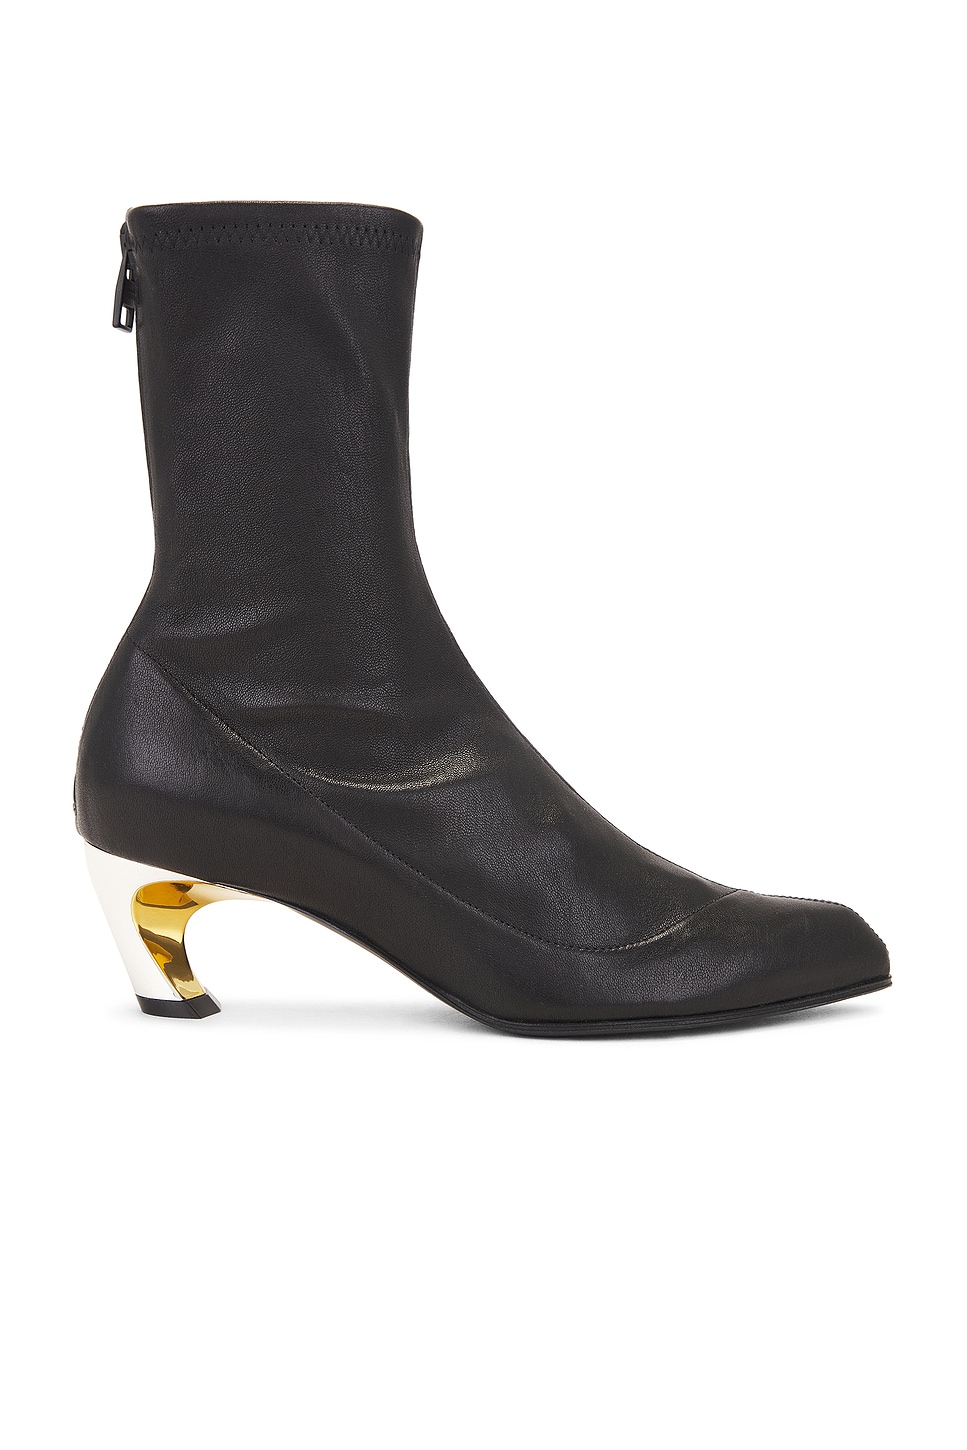 Image 1 of Alexander McQueen Leather Sock Boot in Black, Silver, & Gold